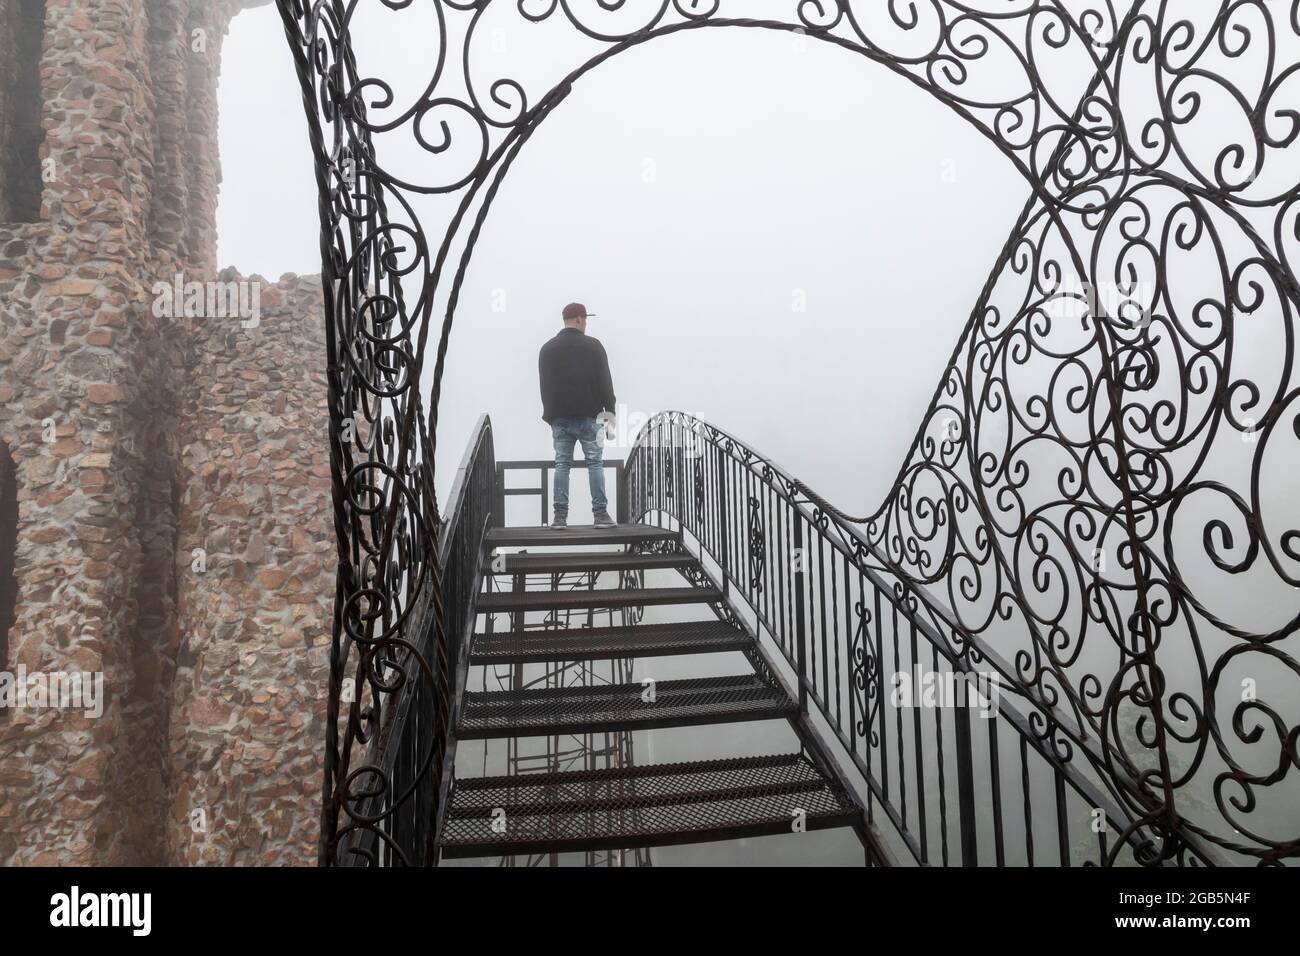 Rye, Colorado - A main stands on an open stairway, high above the ground, at Bishop Castle on a foggy morning. The Castle is an elaborate stone and me Stock Photo